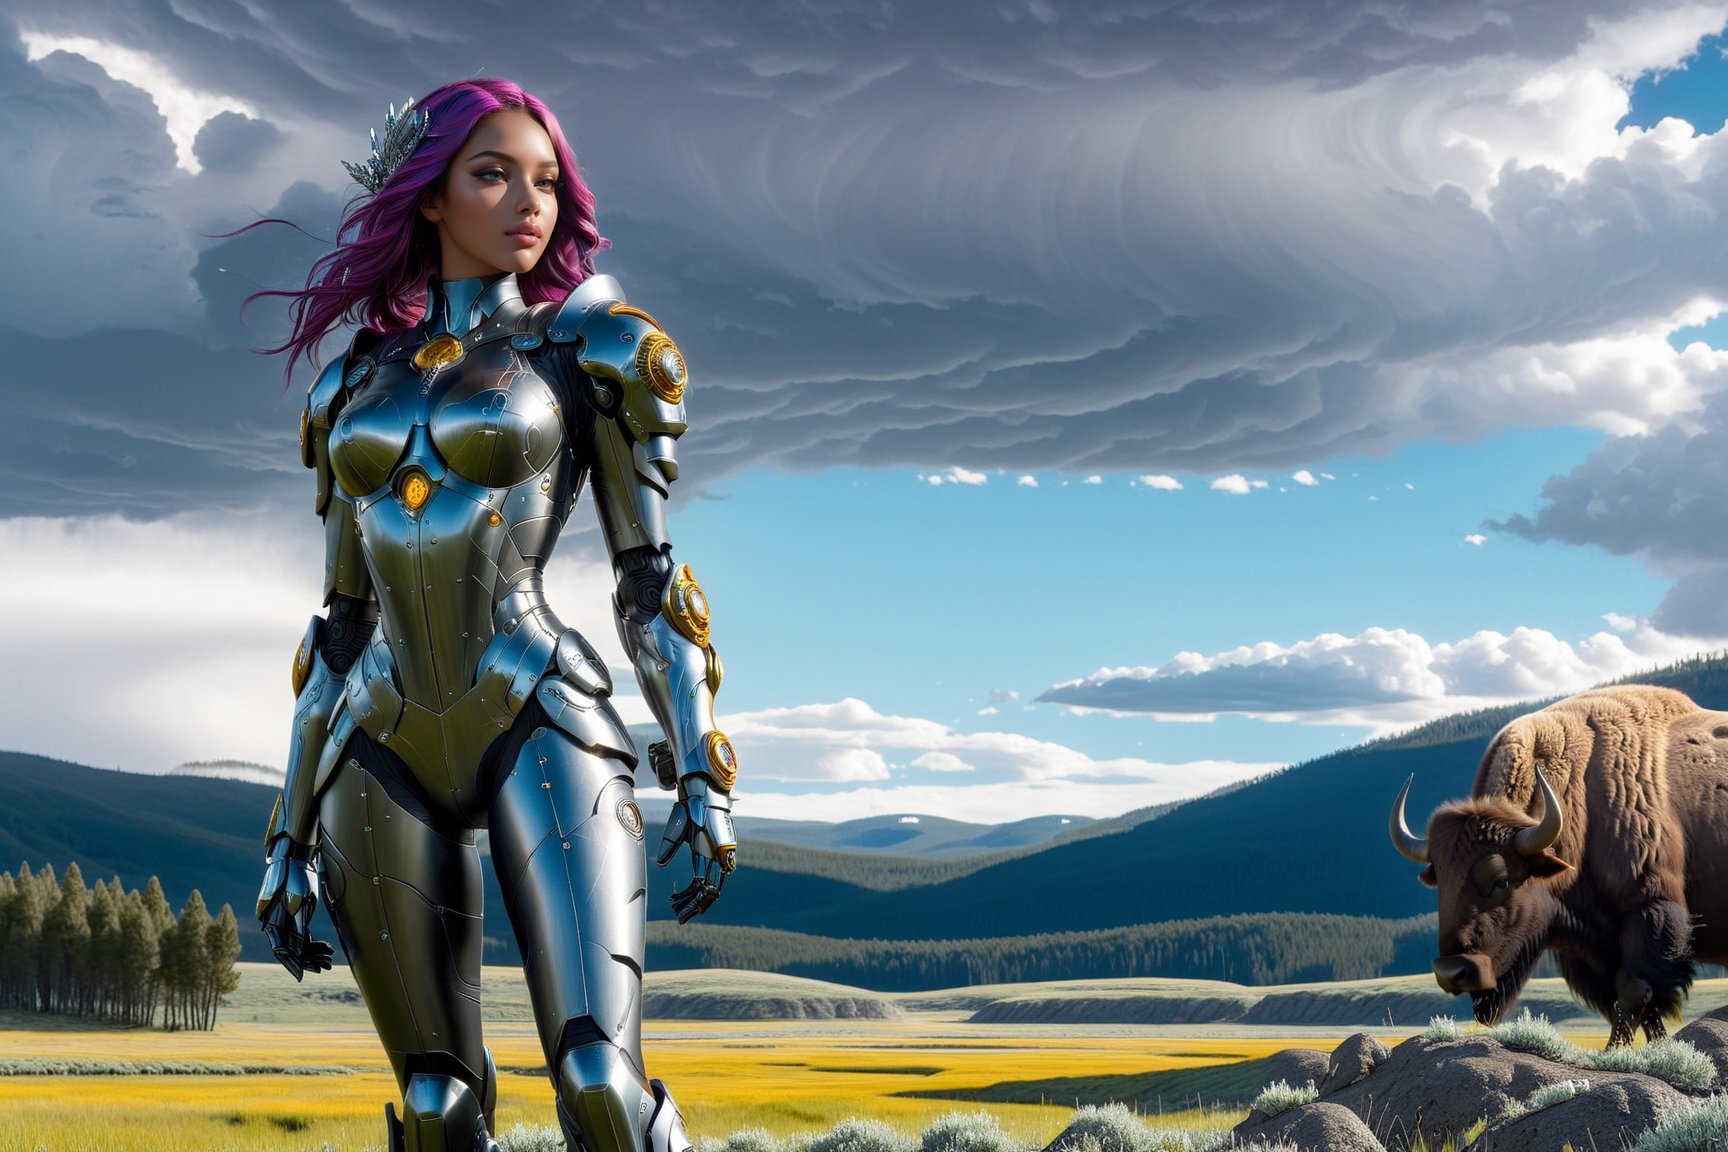 Highly detailed animation of a cyborg girl standing in lamar valley of Yellowstone,20yo,brazilian girl,clear facial features,model body,detailed hair,vibrant colors,perfect body proportions,(highly detailed form-fitting mecha armor),[backdrop:lamarva11ey,outdoors,sky,day, cloud,tree,cloudy sky,grass,nature, beautiful scenery,mountain,winding road,landscape, american bisons],(girl focus)
BREAK 
anime vibes,(fullbody wide shot),rule of thirds,studio photo,(masterpiece,sharp focus,high contrast,HDR, trending on artstation,8K,Hyper-detailed,intricate details,hyper realistic:1.3),cinematic lighting,by Karol Bak, Alessandro Pautasso, Hayao Miyazaki, ani_booster,art_booster,real_booster,photo_b00ster,ani_booster,Decora_SWstyle,Ye11owst0ne